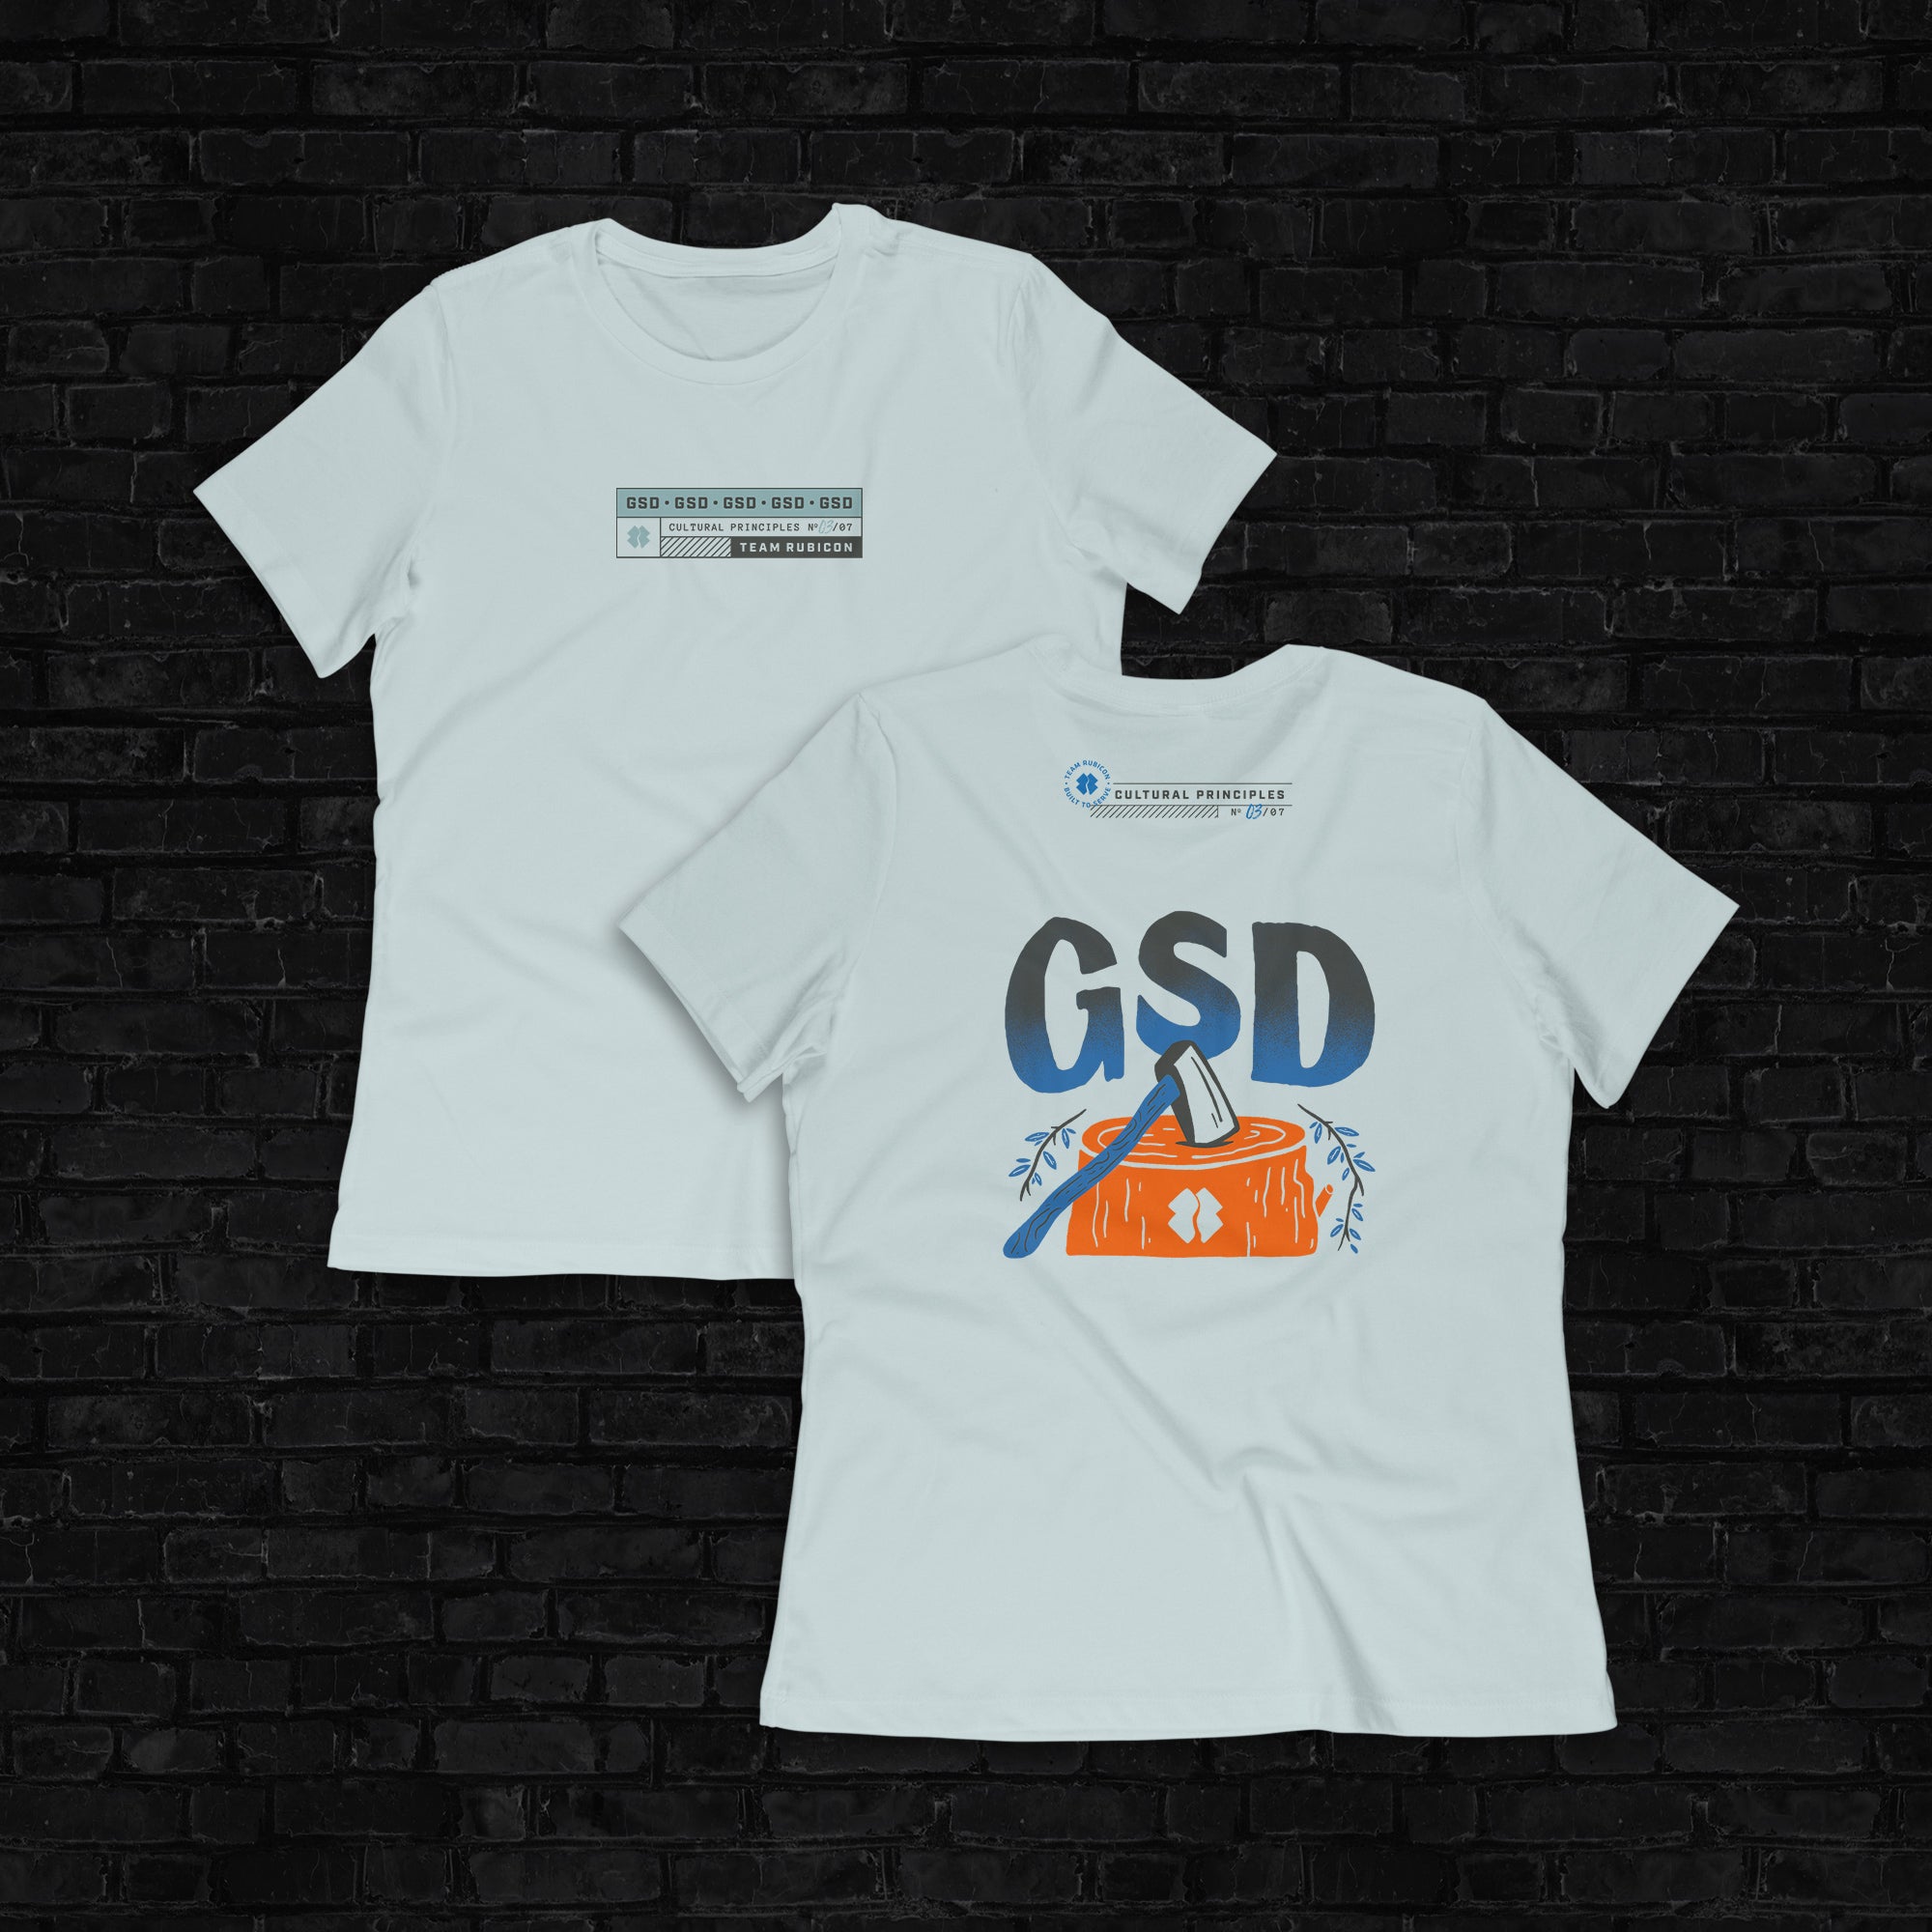 GSD Women's Fitted T-Shirt